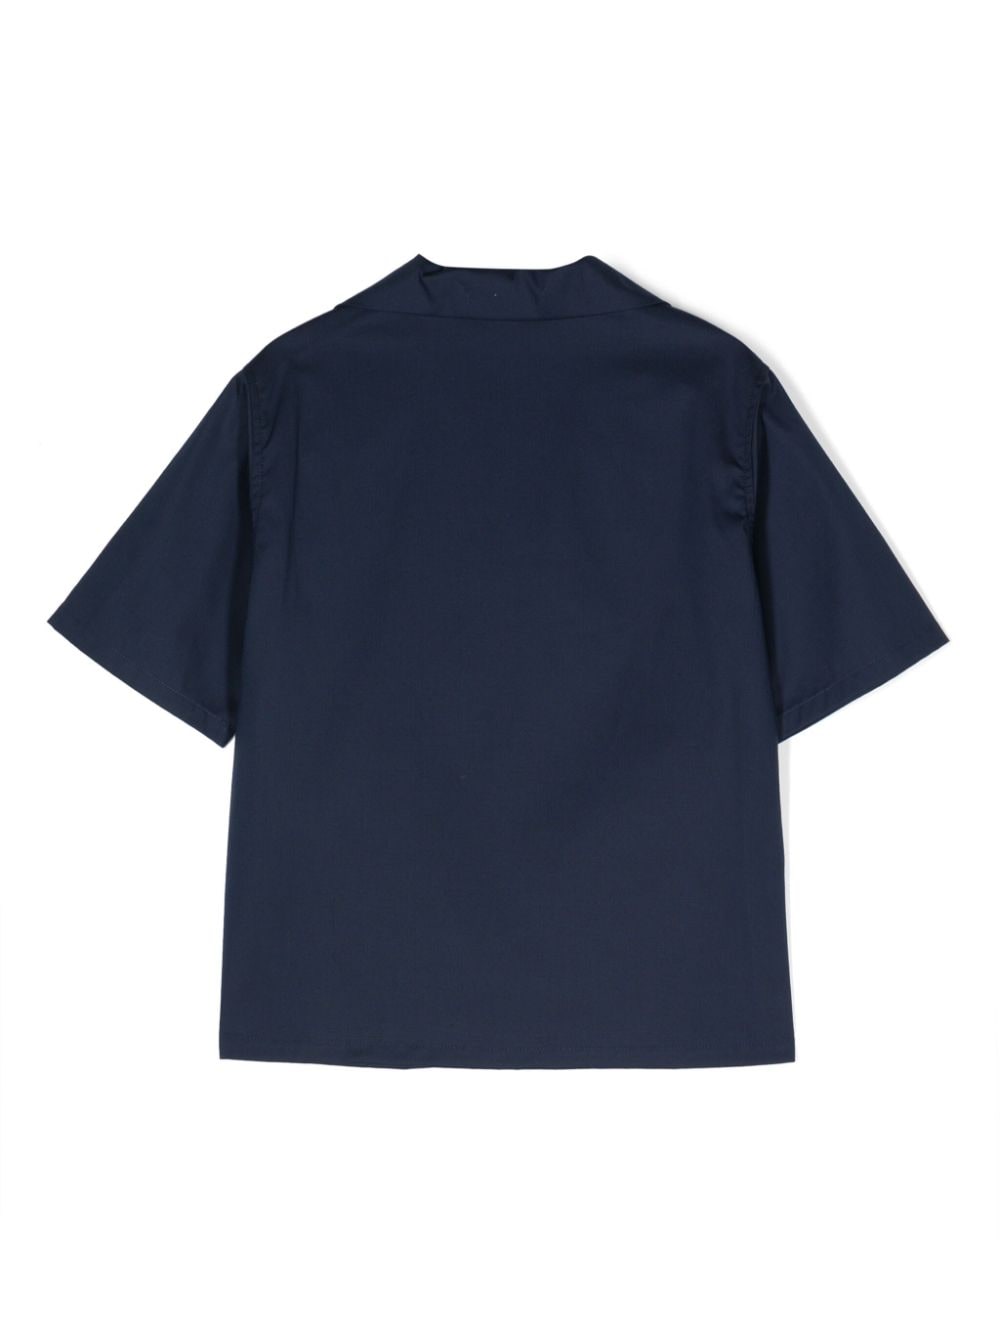 Blue shirt for girls with logo